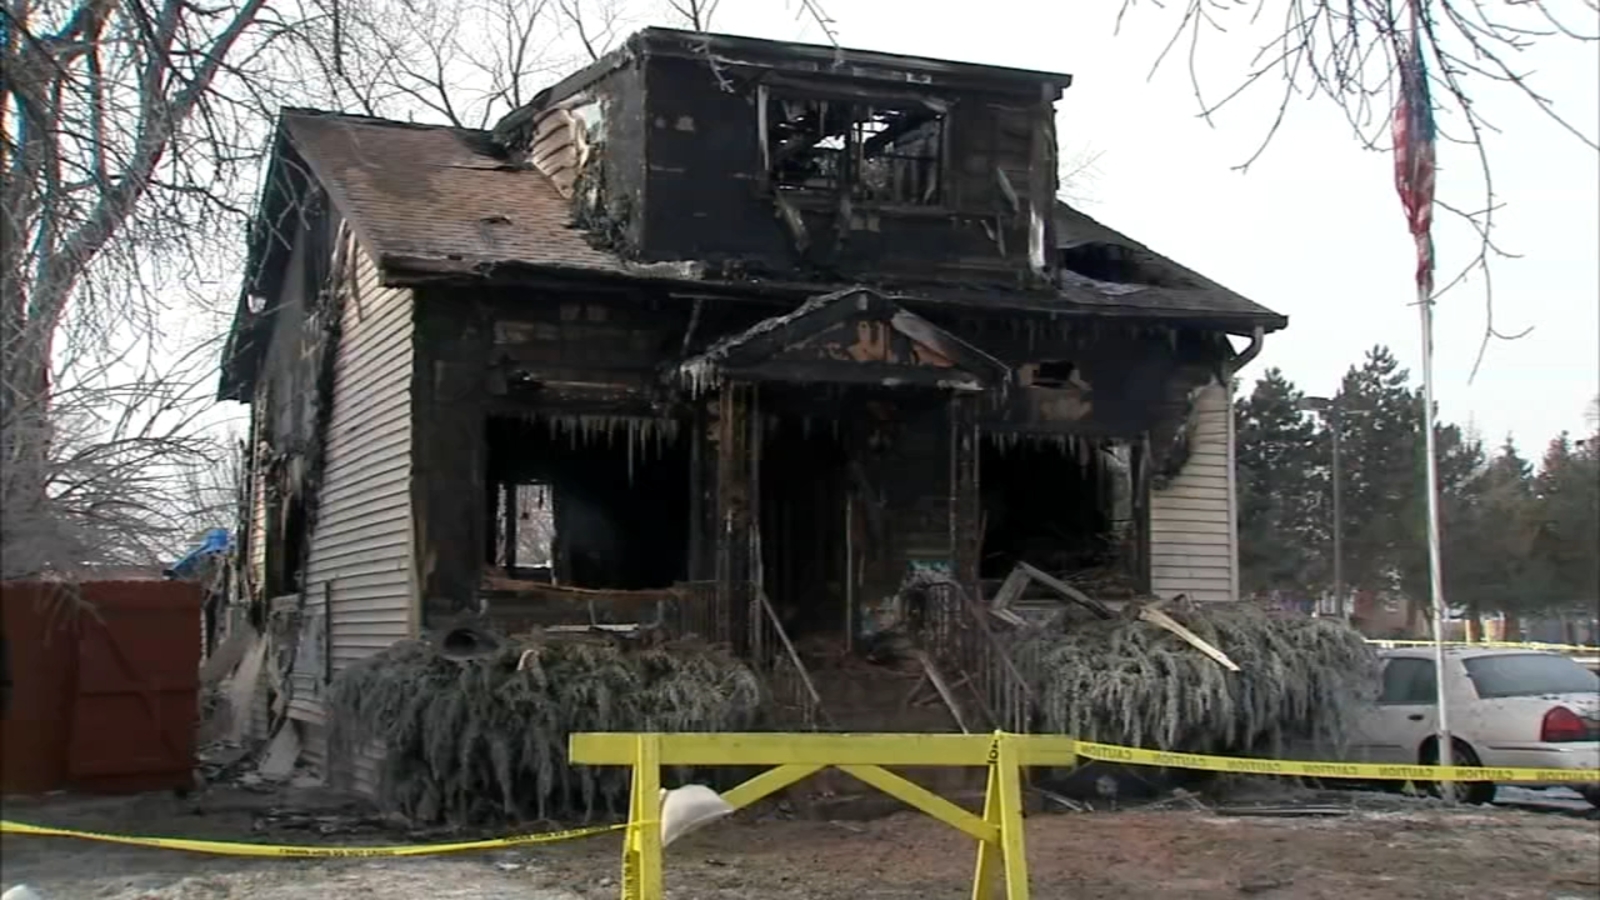  River Grove house fire leaves 3 dead, 1 injured 